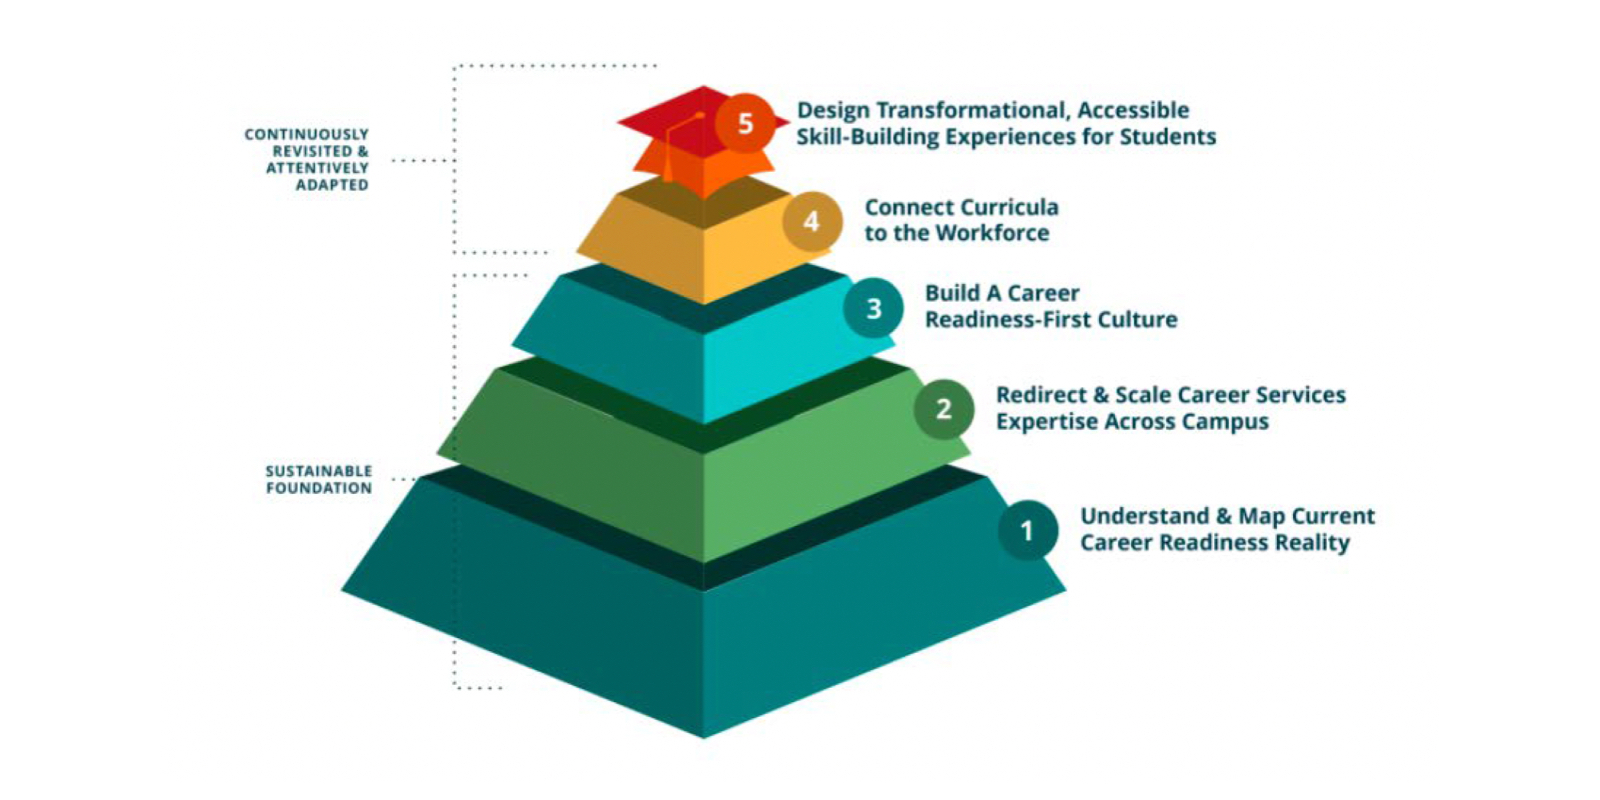 The New Model for Equitable Career Readiness